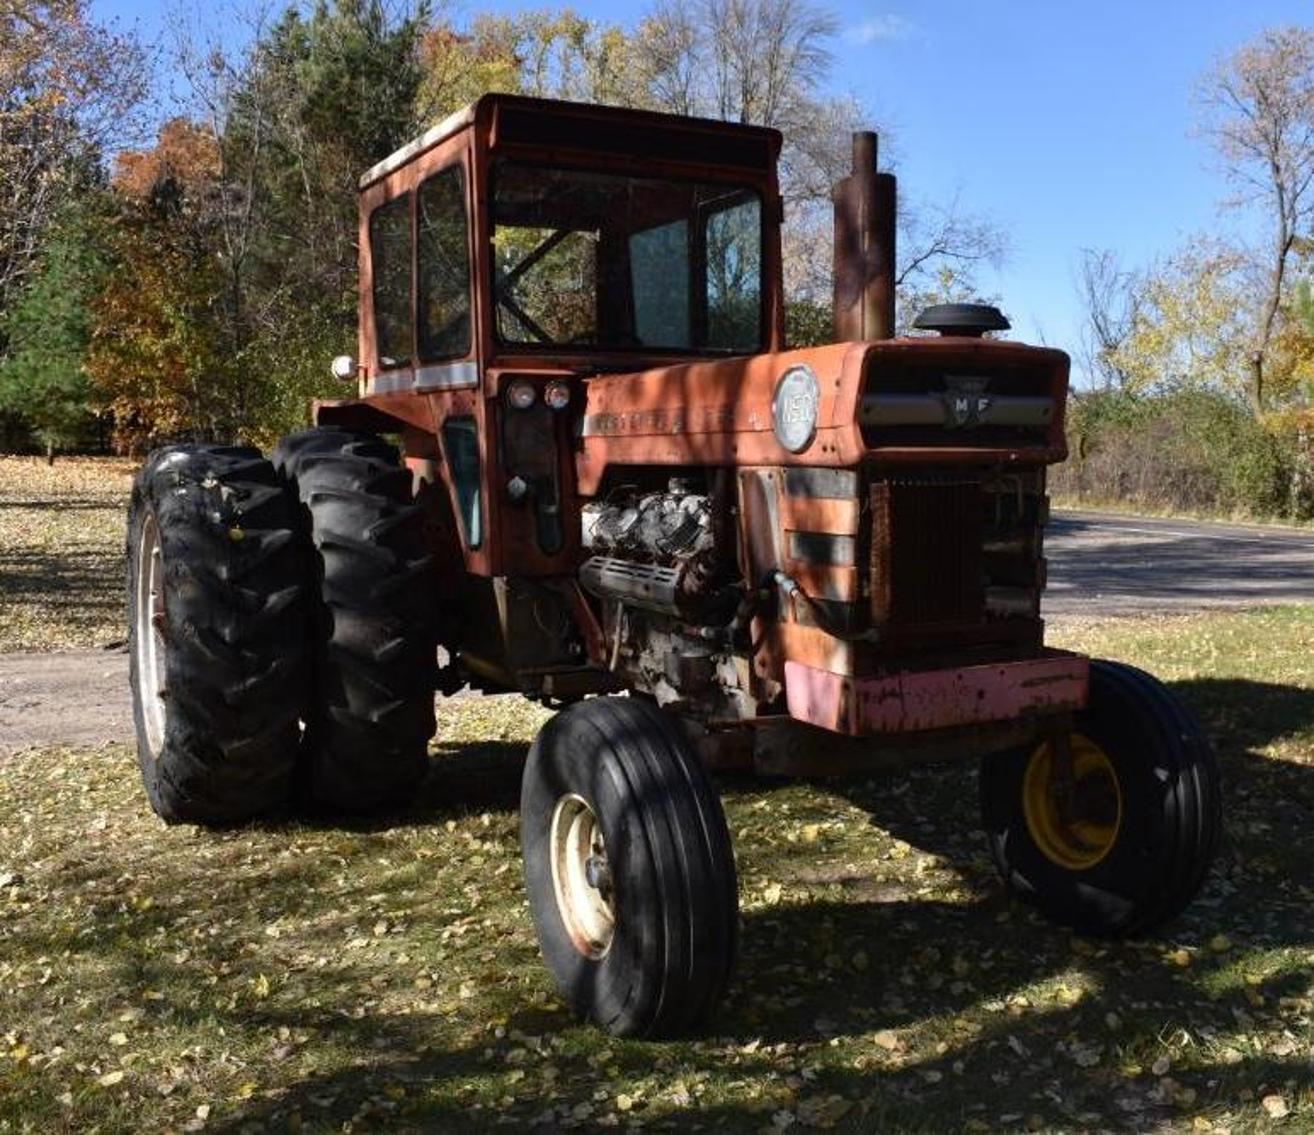 Massey Ferguson 1150 Tractor, Road Grader, Plow Truck, Snow Blowers and More